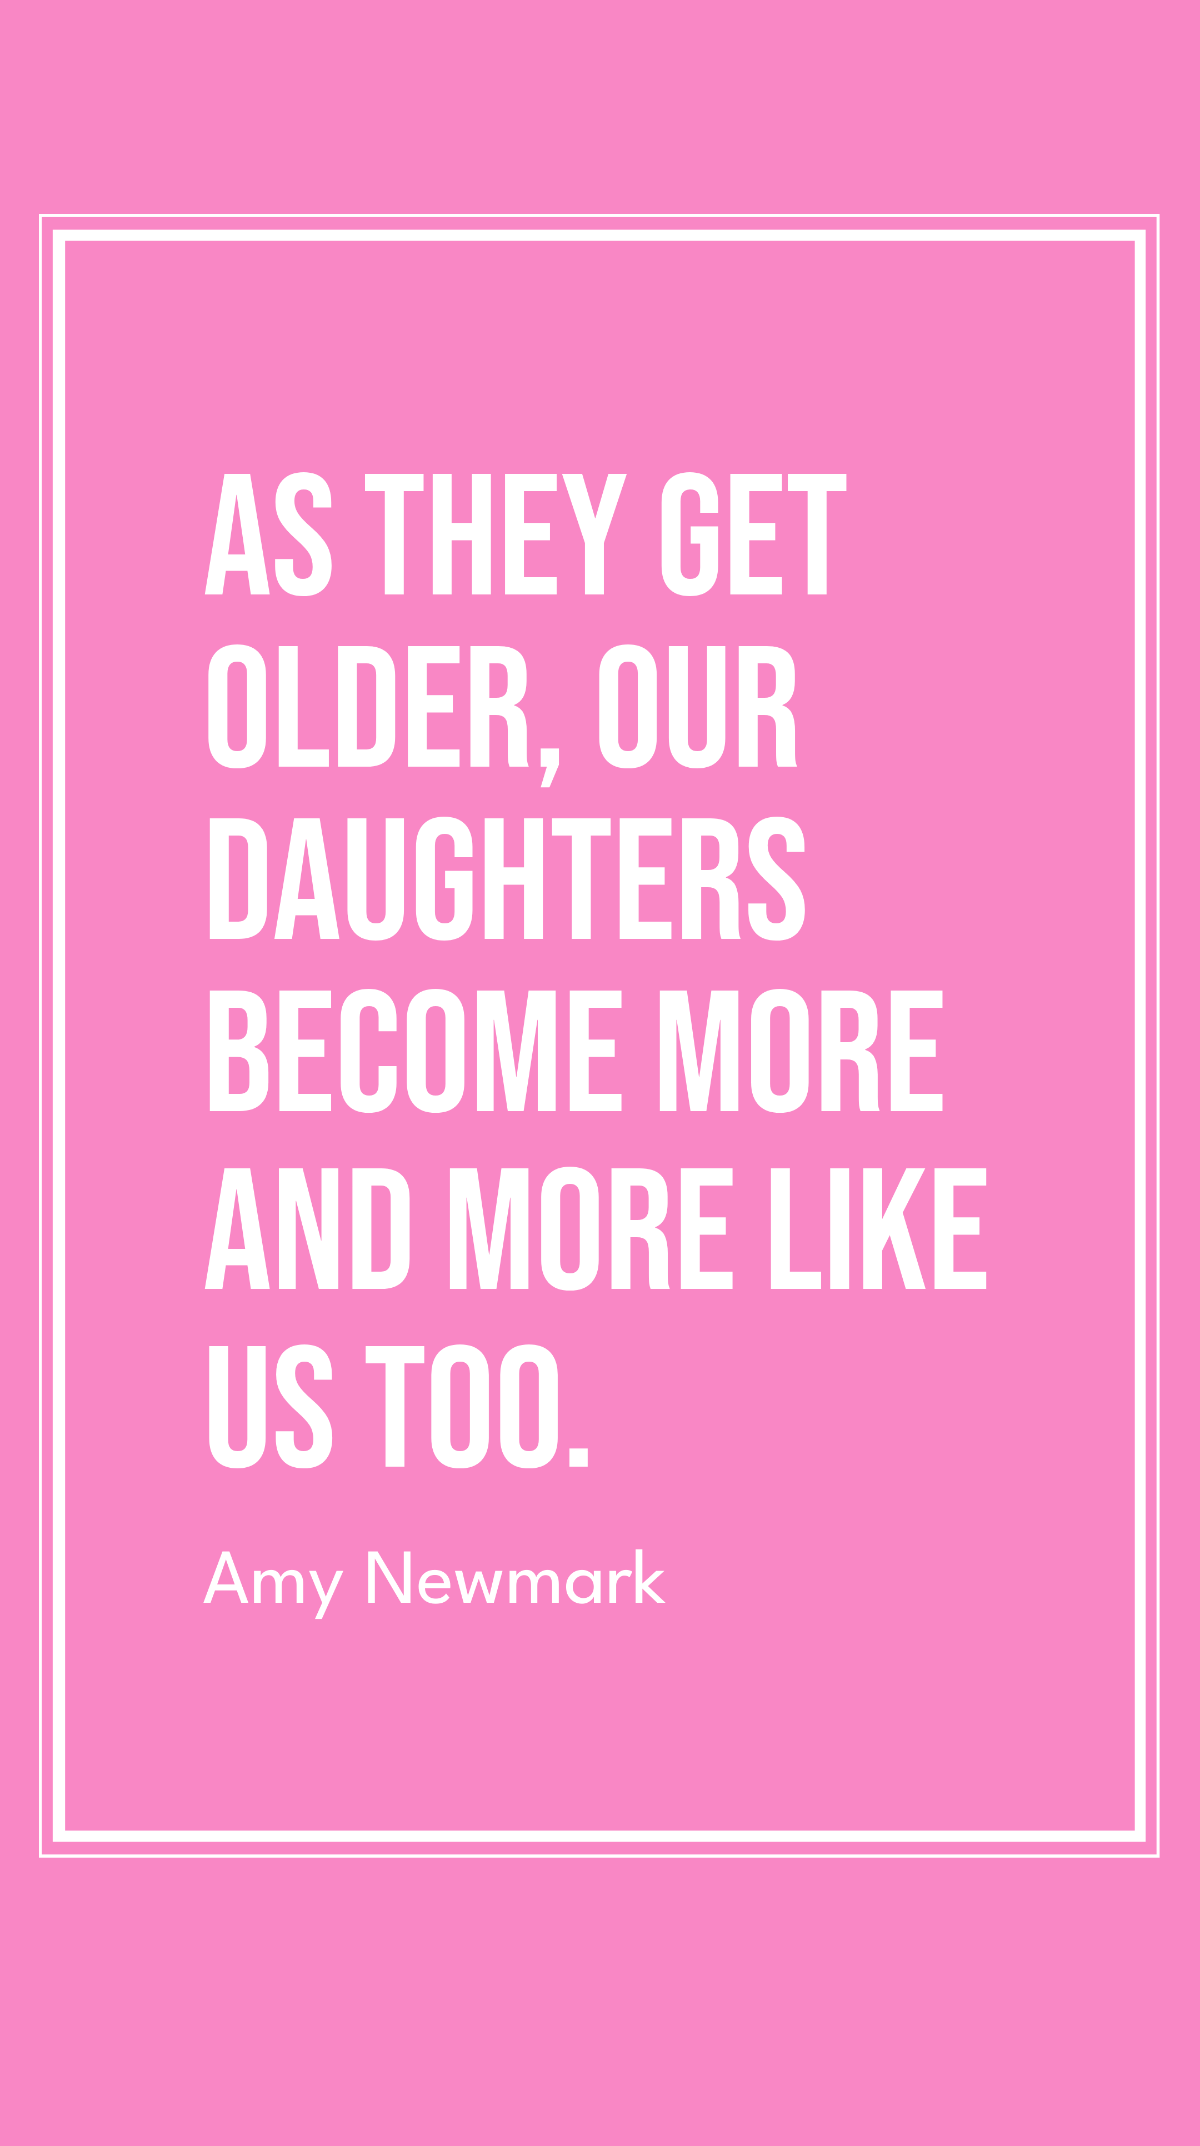 Amy Newmark - As they get older, our daughters become more and more like us too.